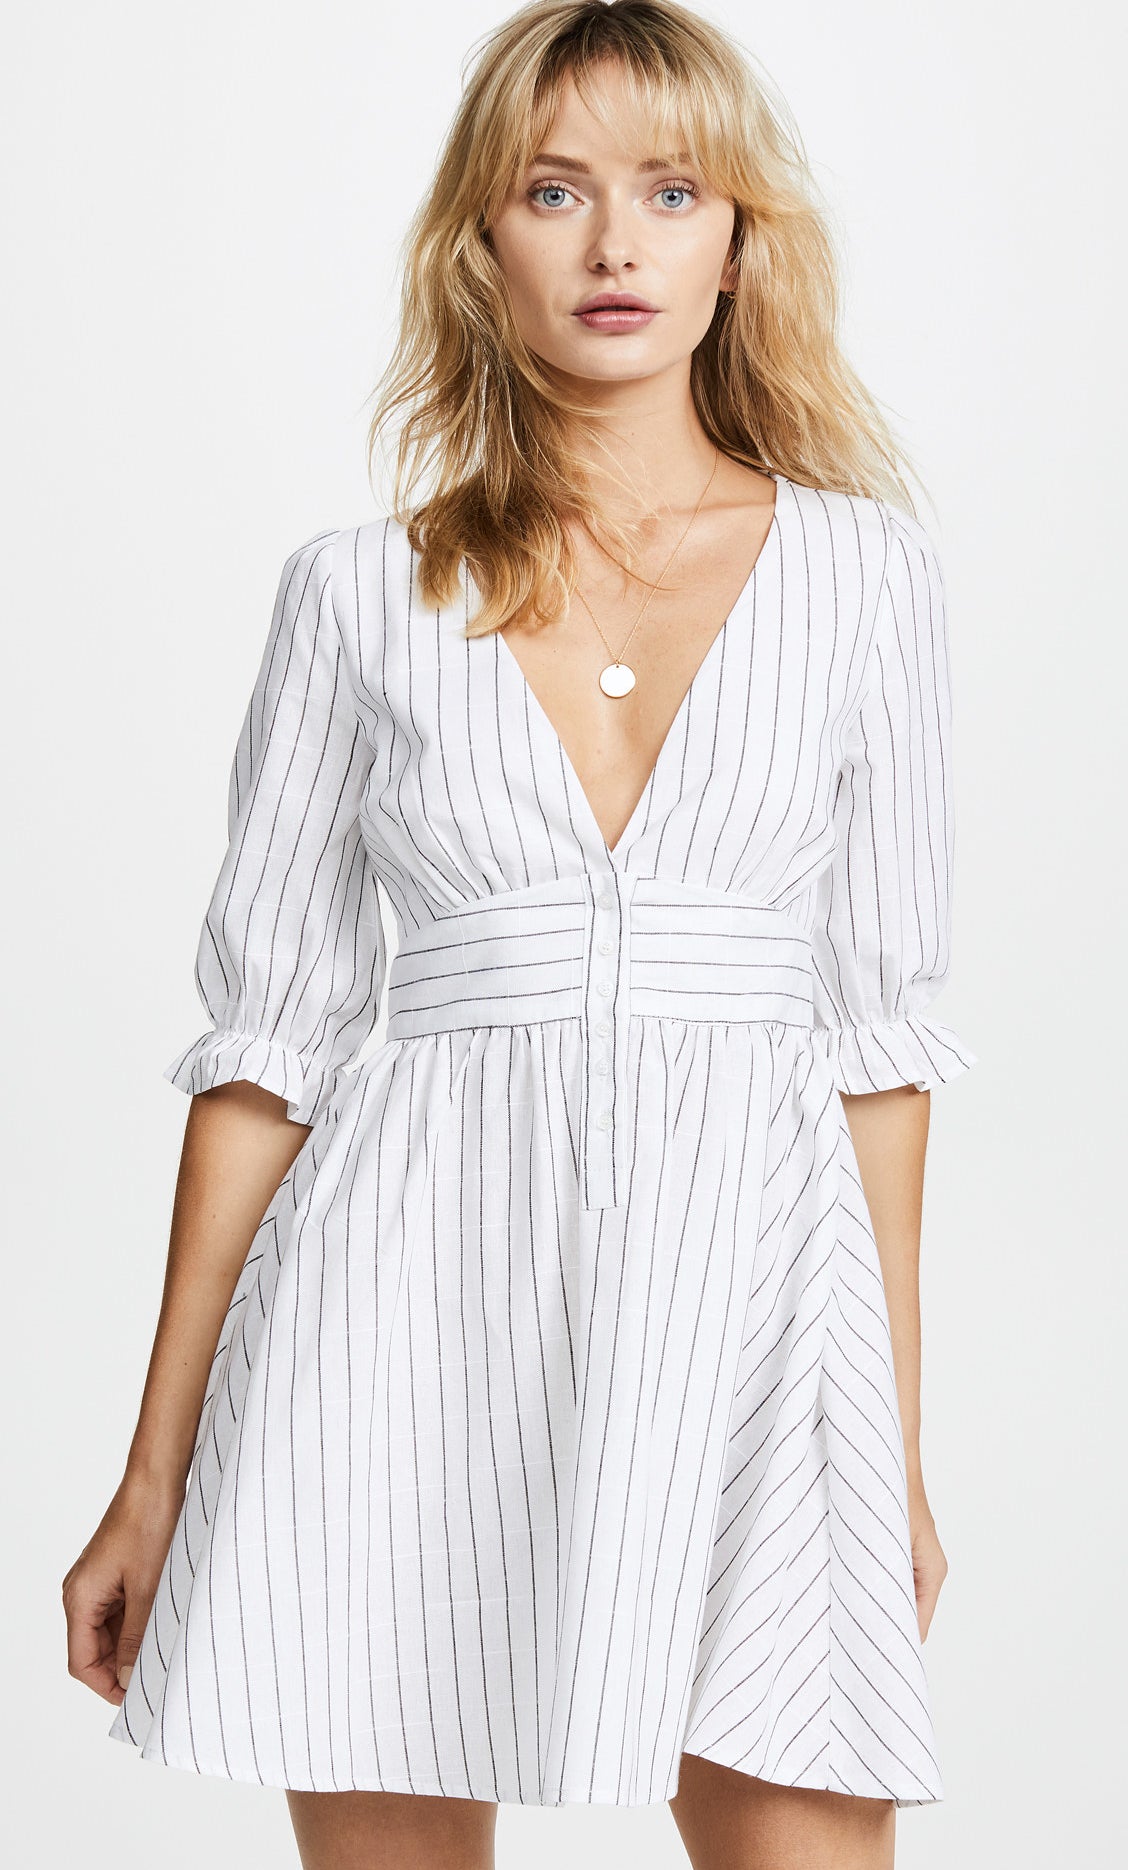 Shopbop Is Having A Sale And We Found The Stuff You're DEFINITELY Going ...